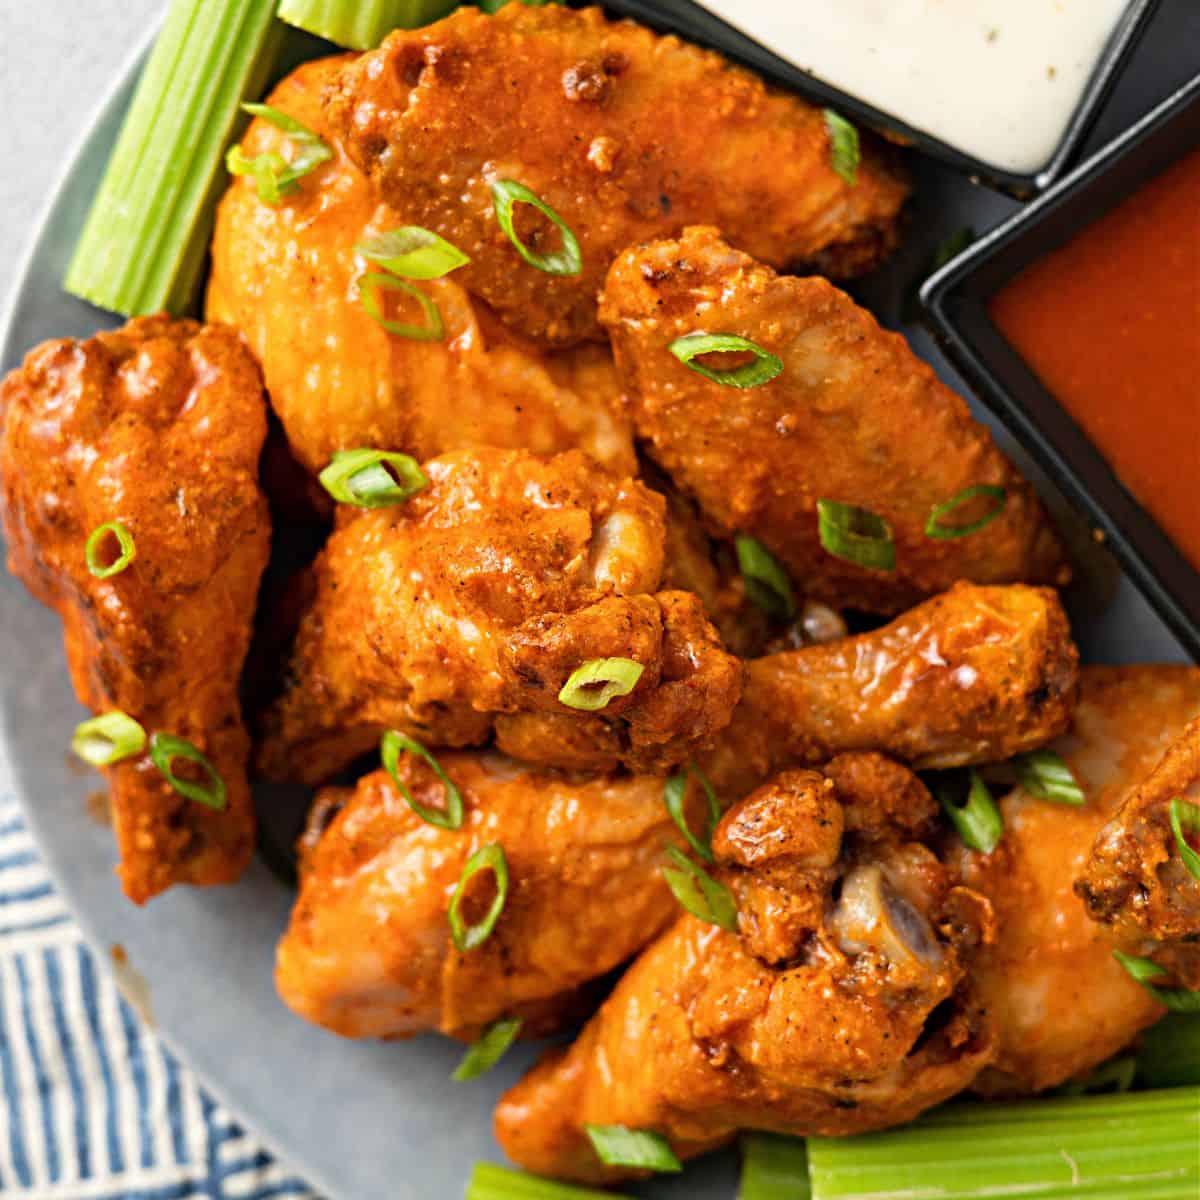 Baked Buffalo Wings with celery on a plate